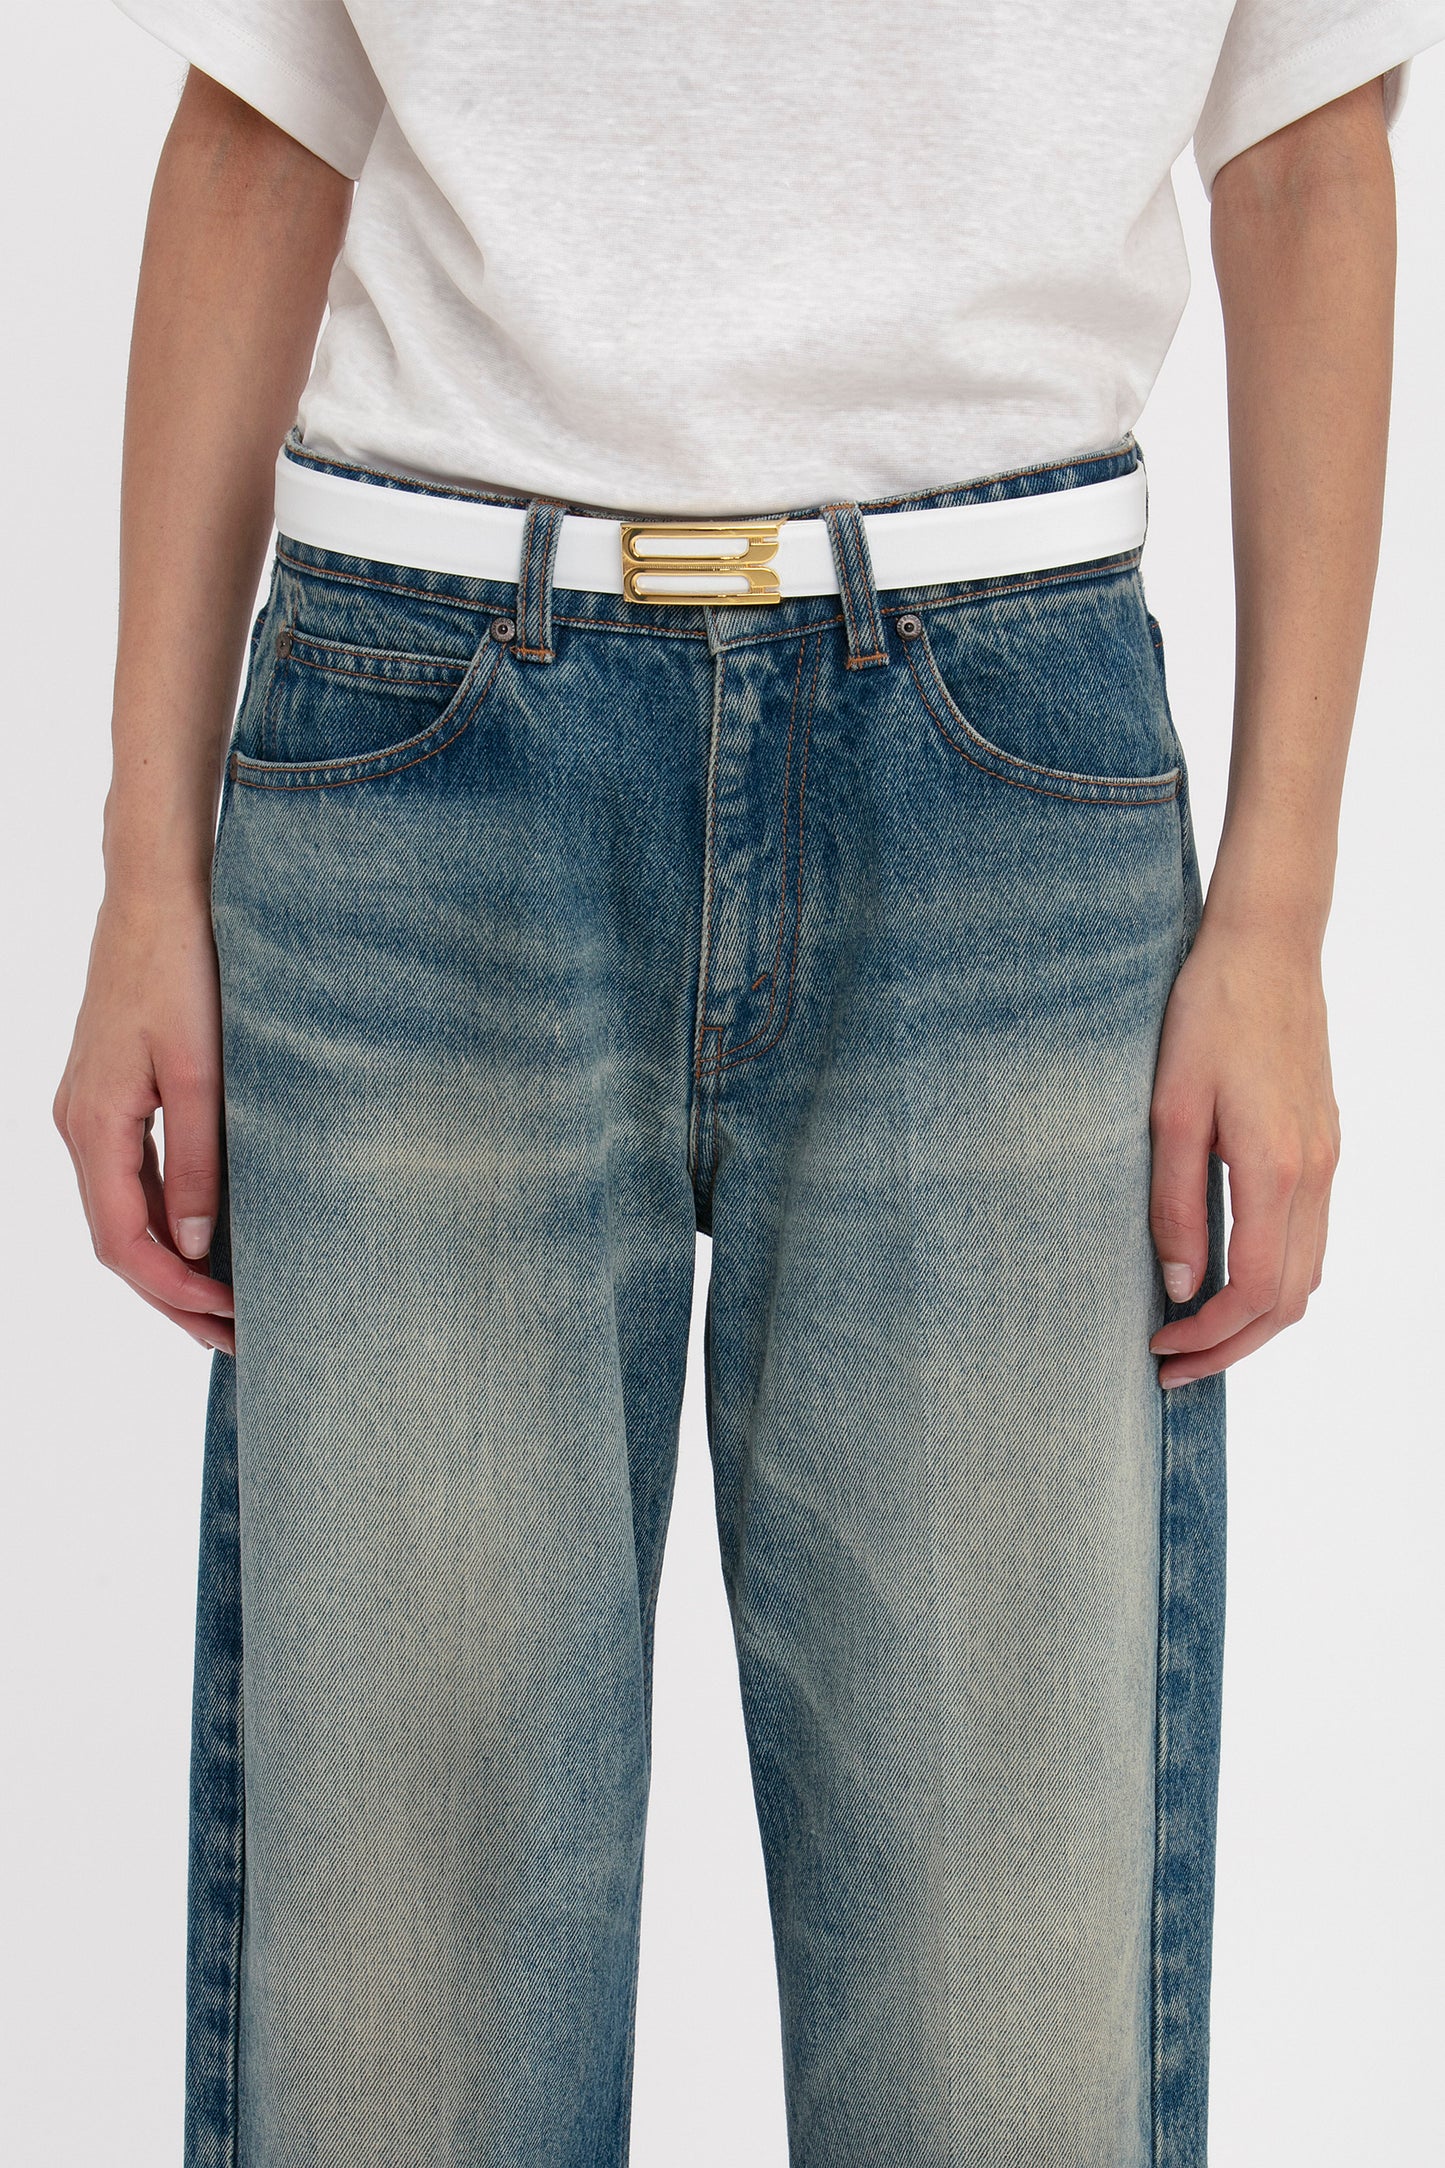 A person wearing a white t-shirt tucked into faded blue jeans with a Victoria Beckham Frame Belt In White Leather featuring gold hardware, showing hands resting at their sides.